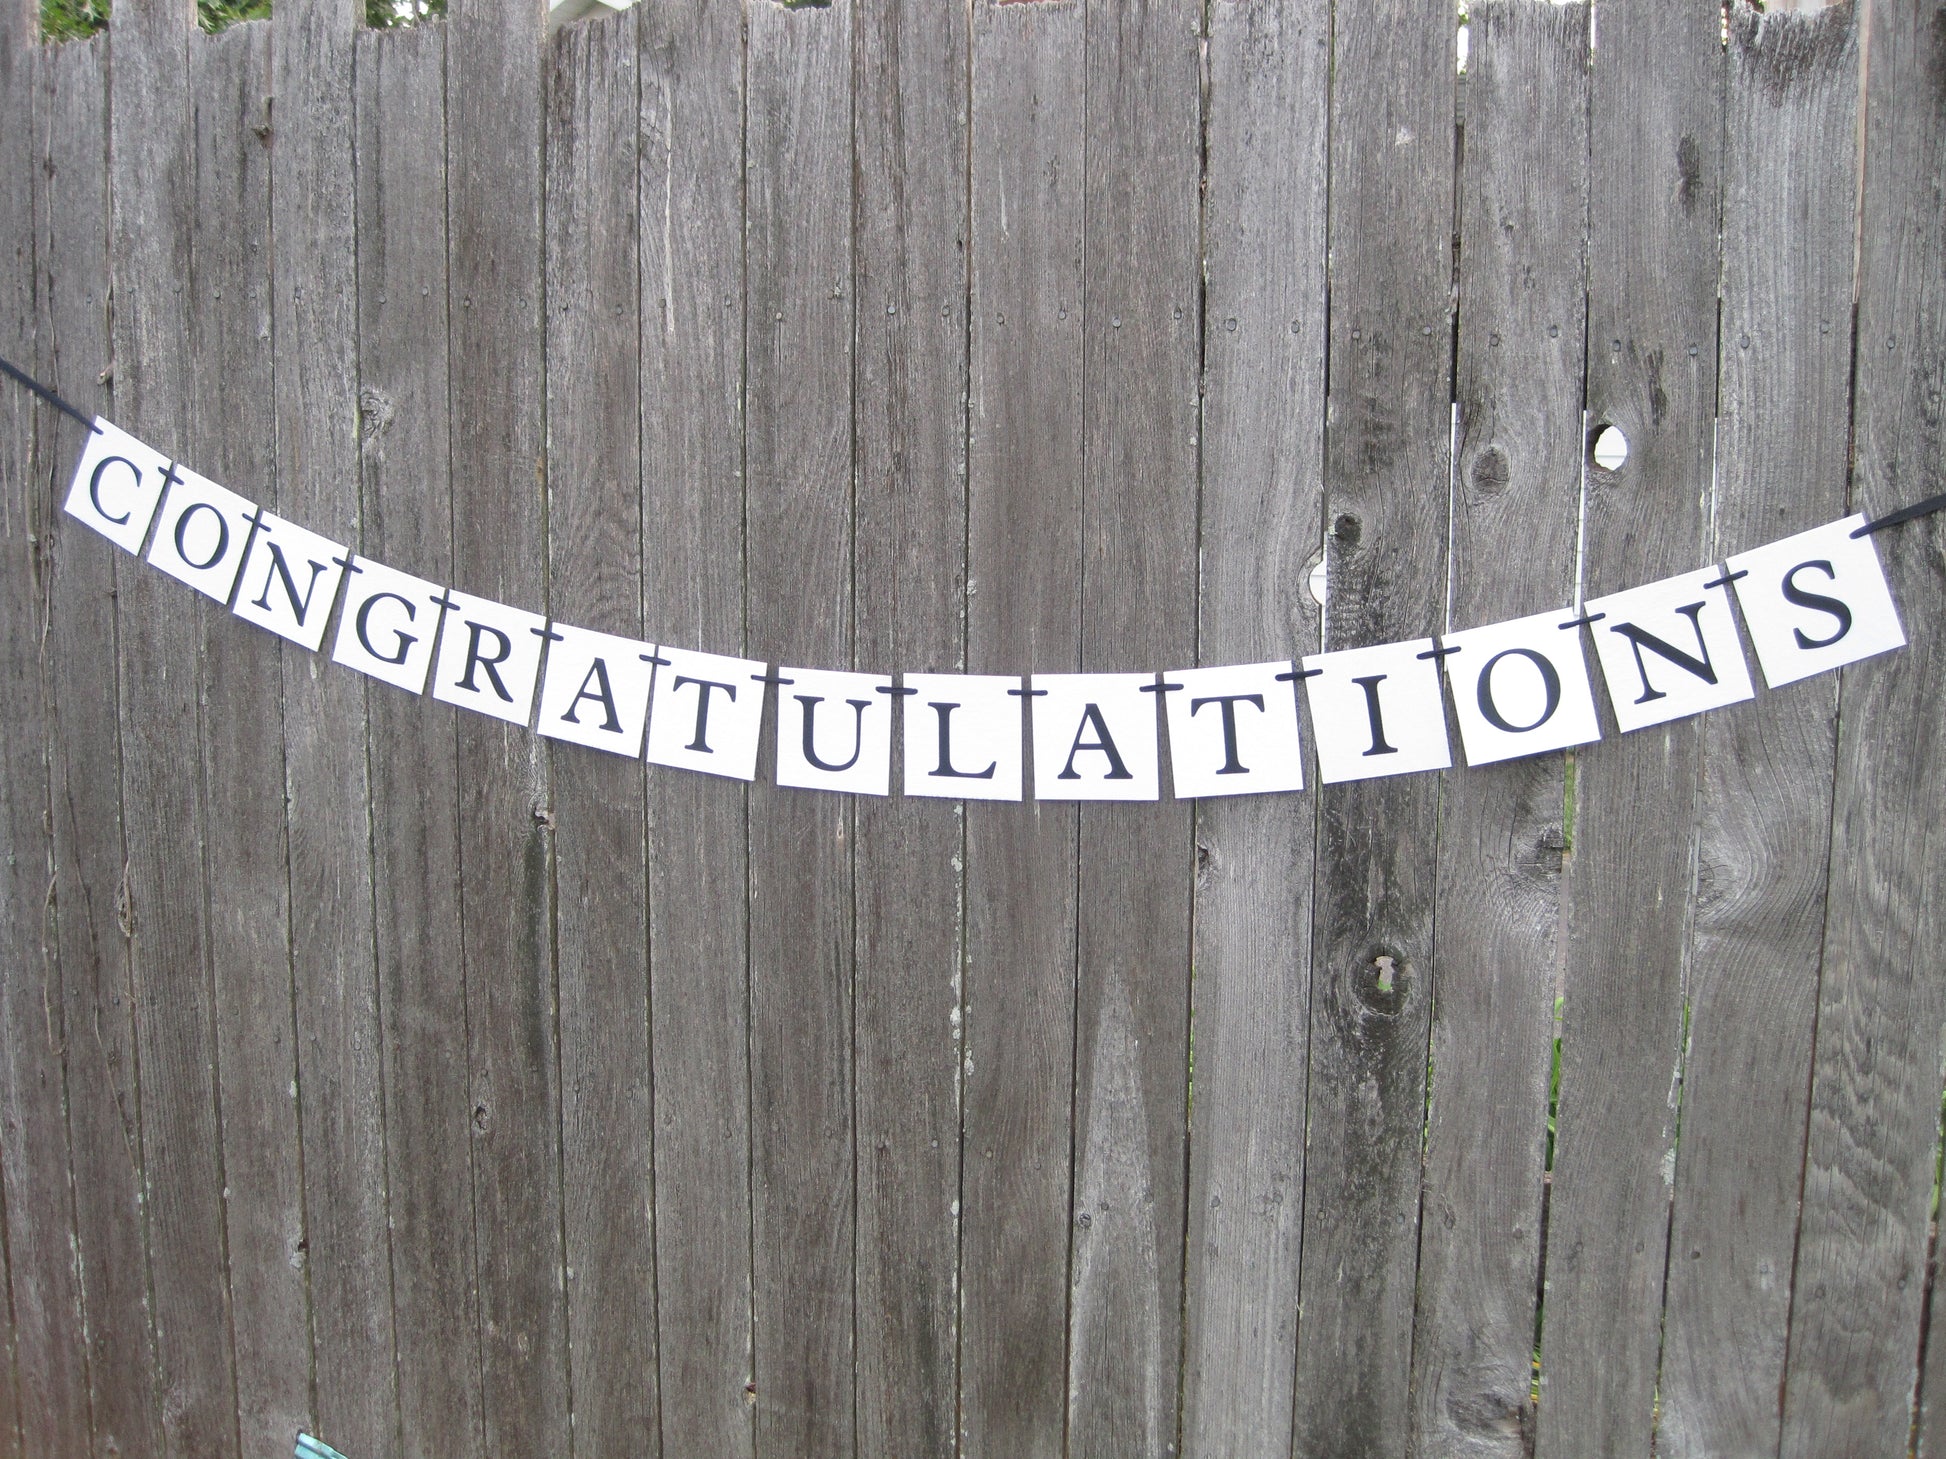 Printable congratulations banner - DIY party decoration - Celebrating Together